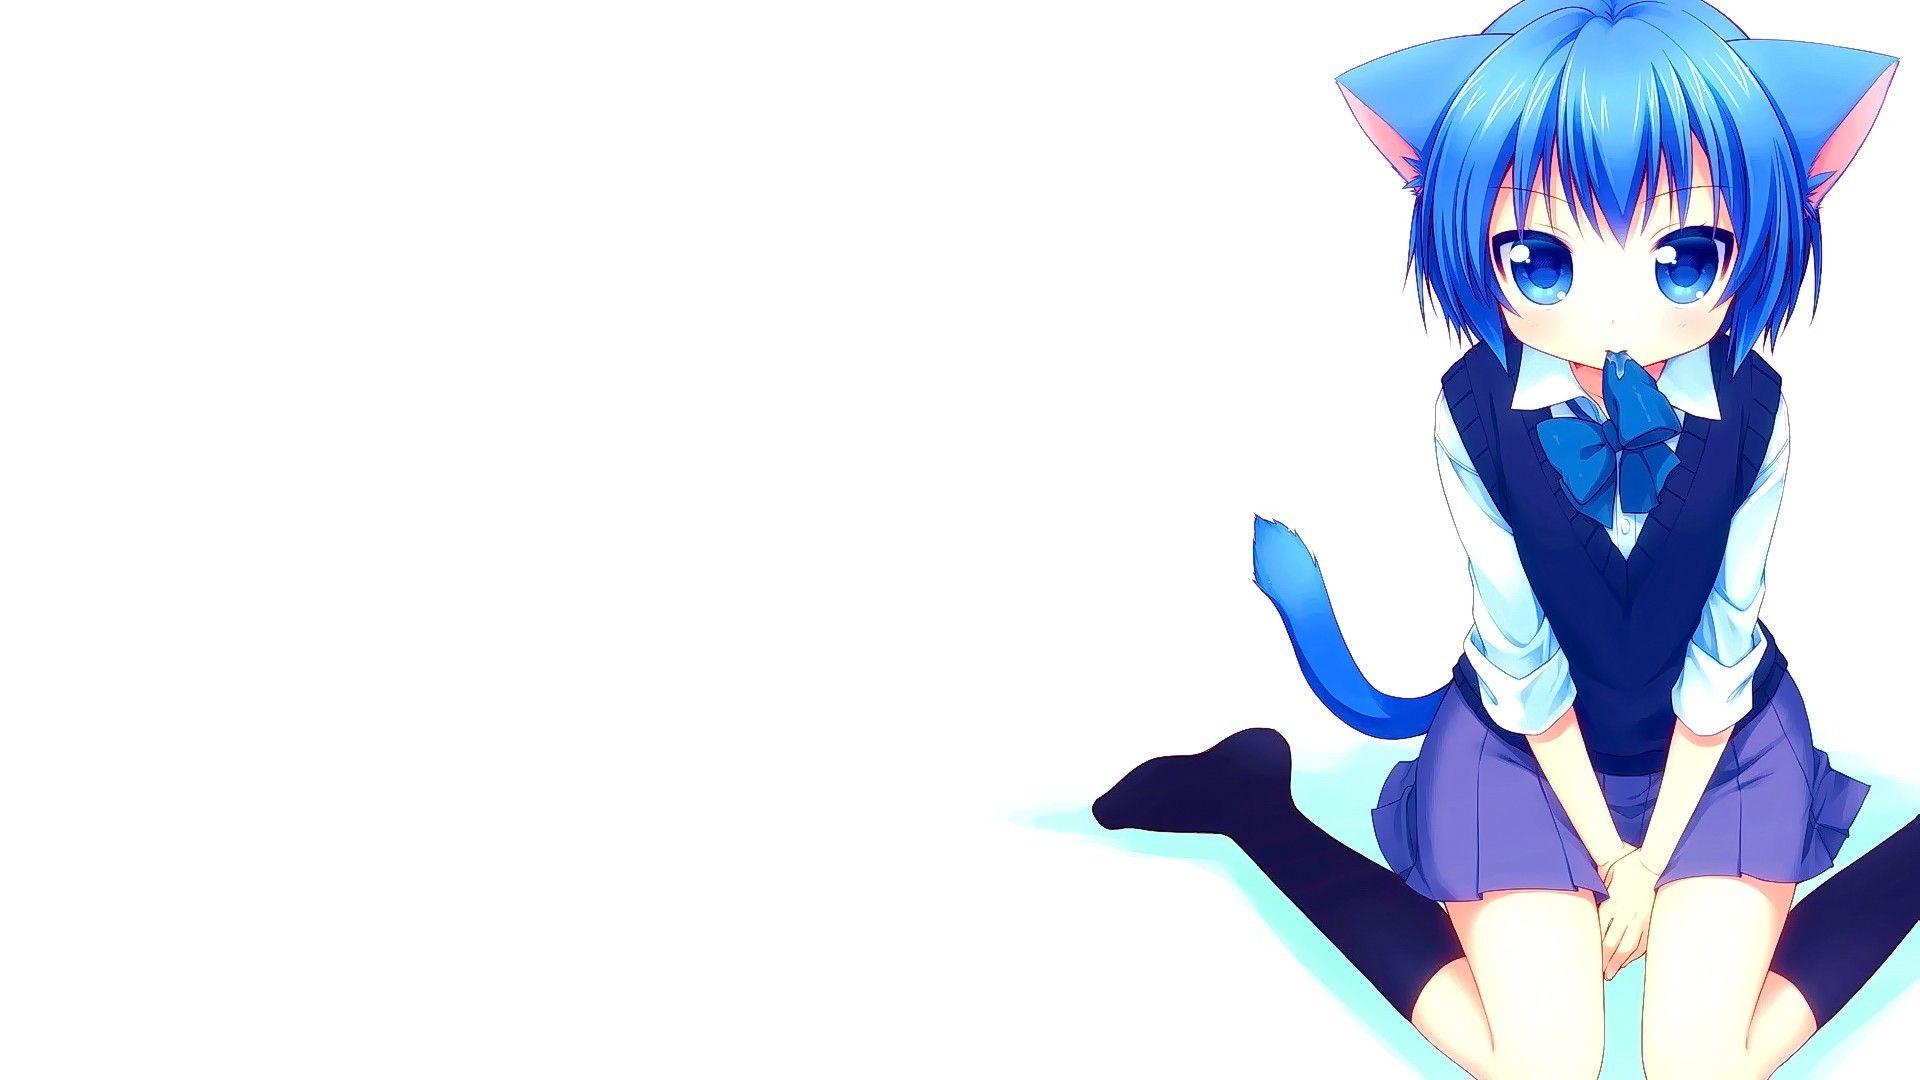 Anime Girl with Blue Hair and Cat Ears - wide 5